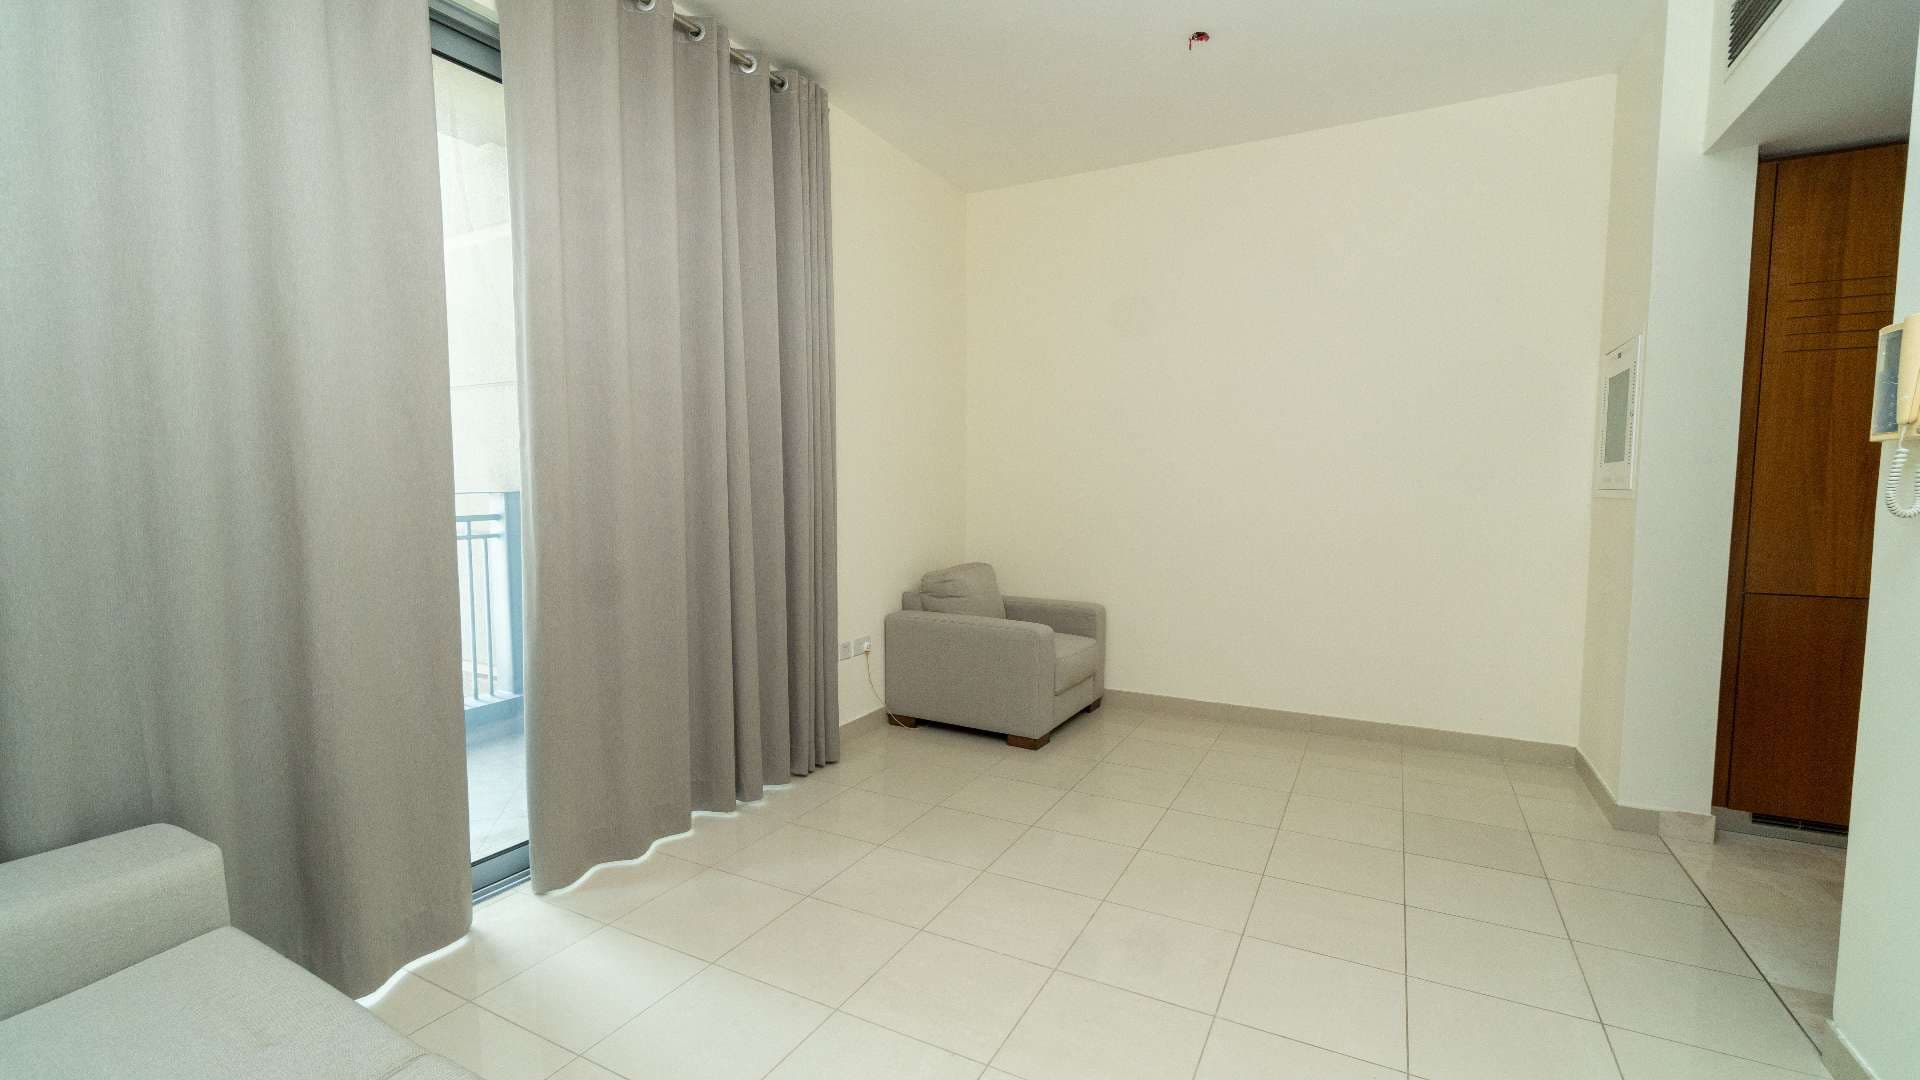 1 Bedroom Apartment For Rent Standpoint Towers Lp10890 9244d991a367500.jpeg